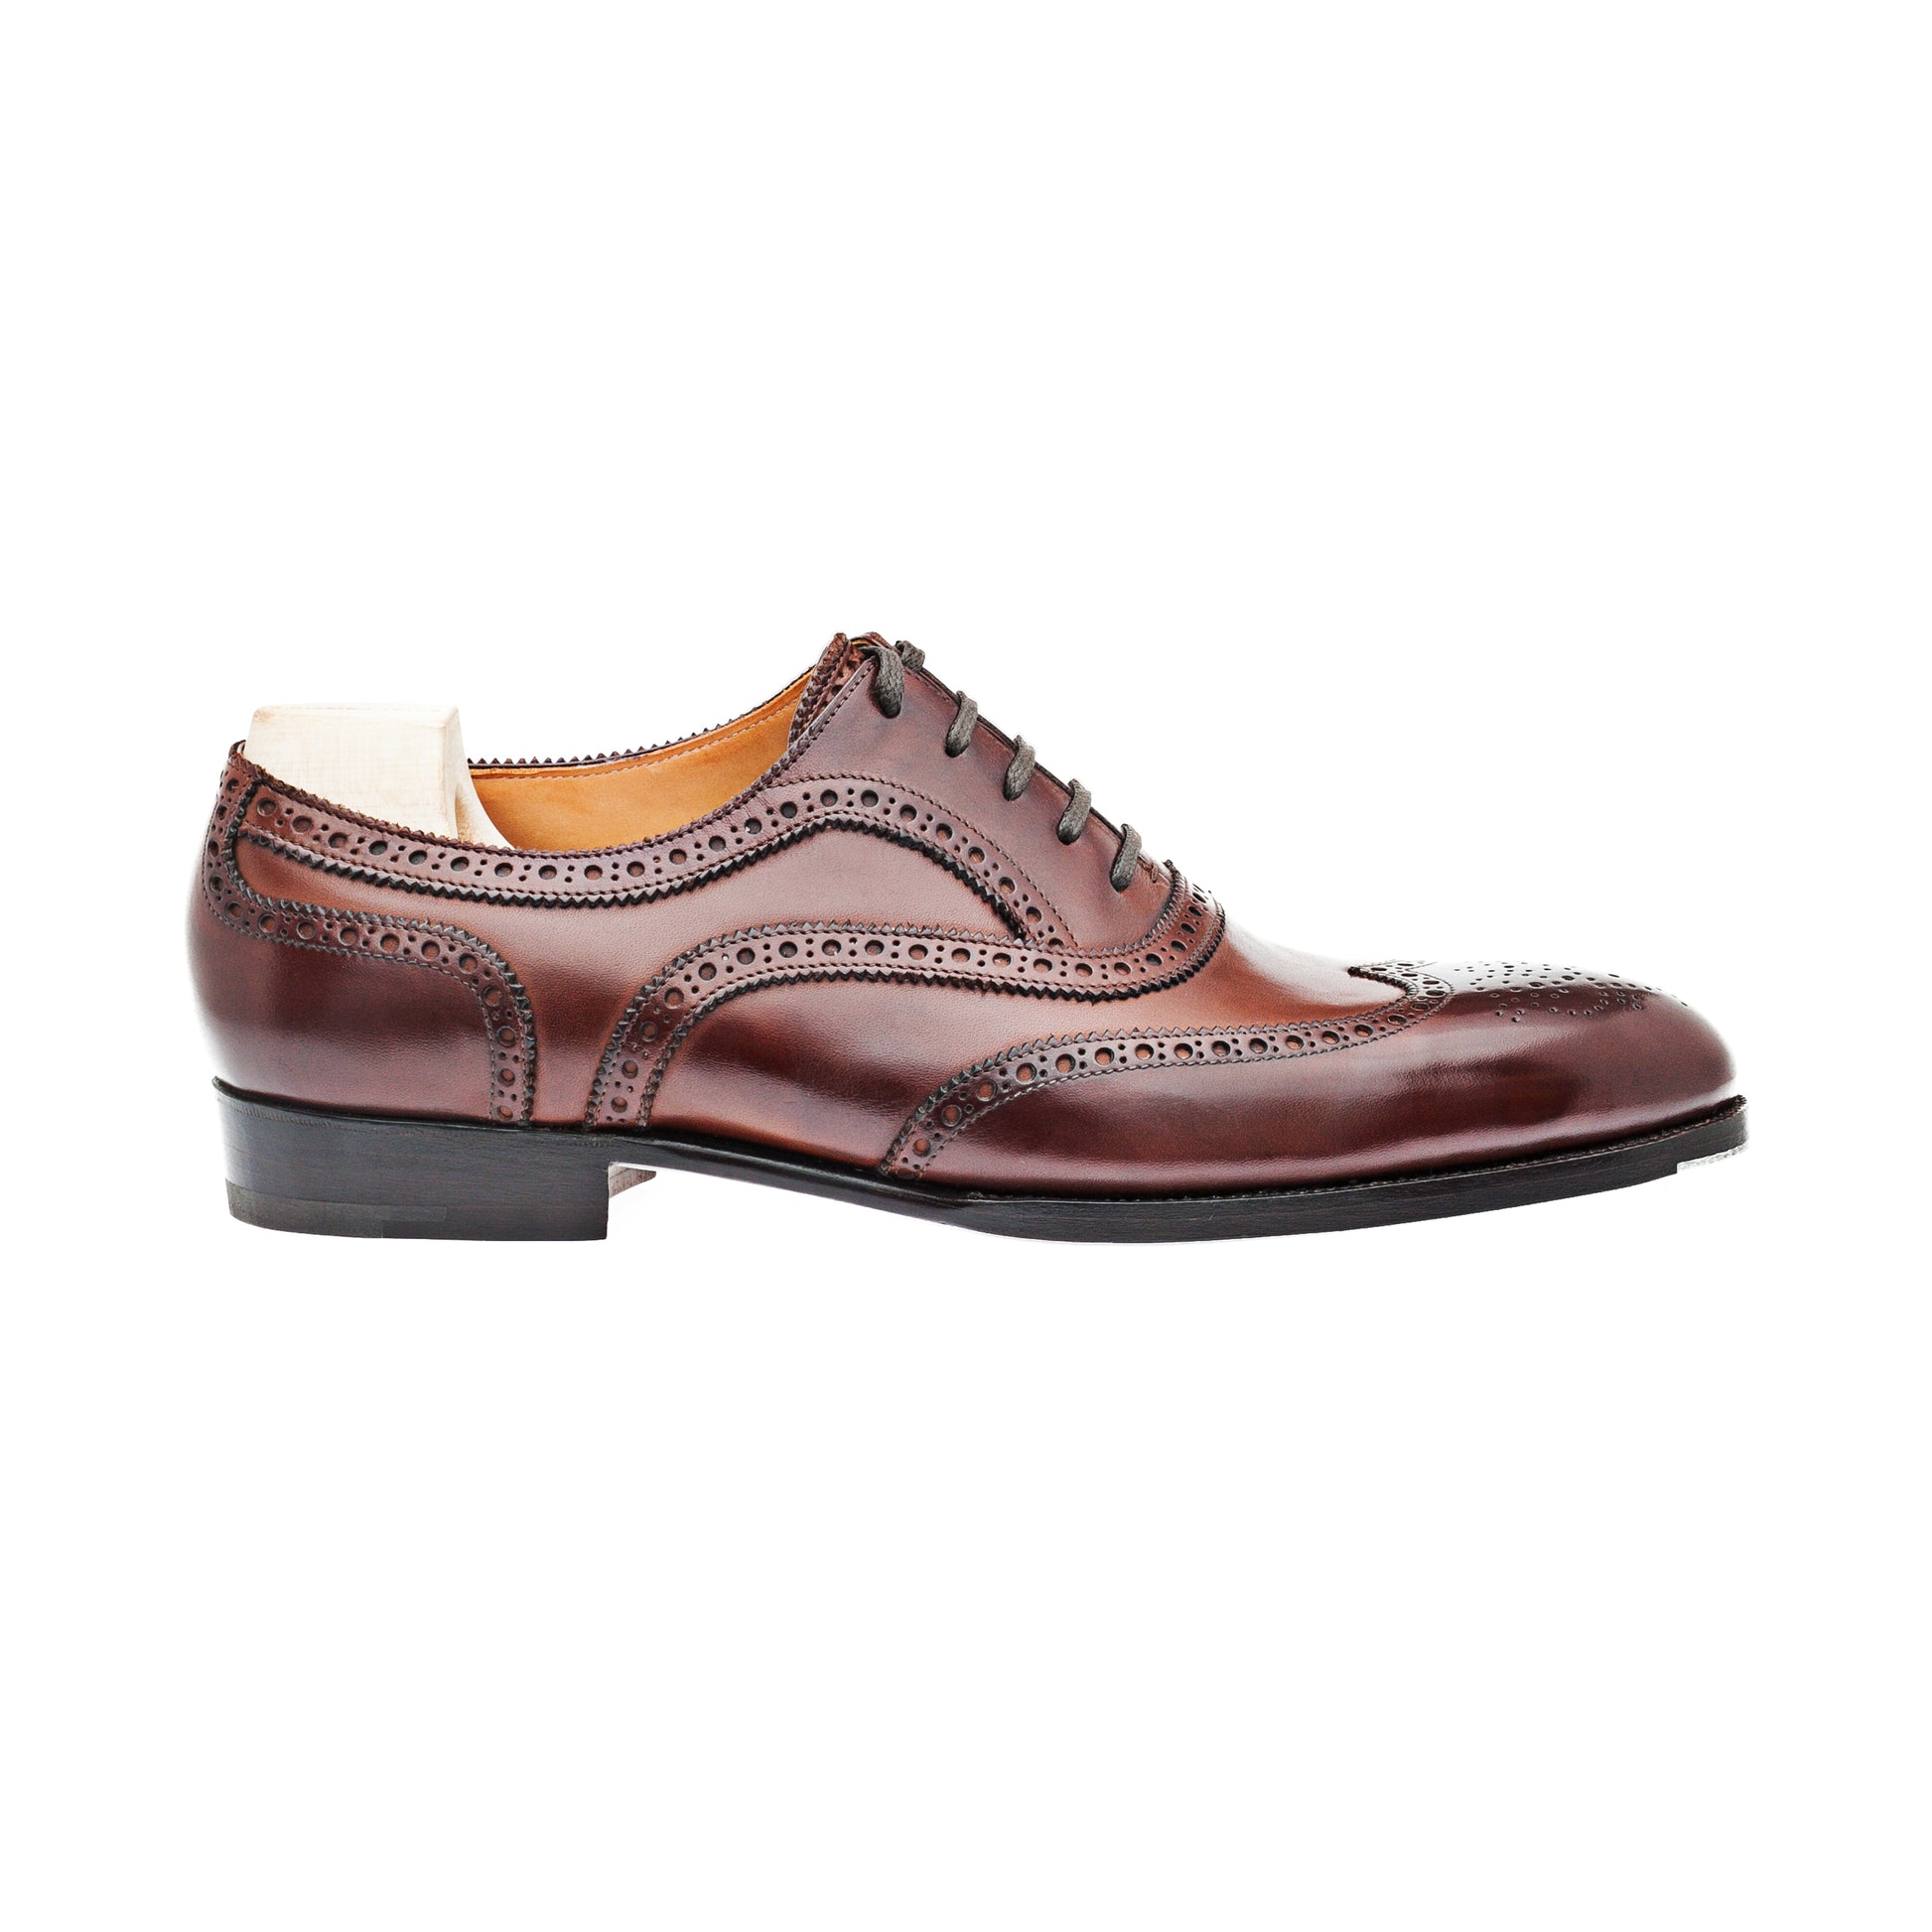 Long wing full brogue Oxford with gimped lines – Saint Crispin's